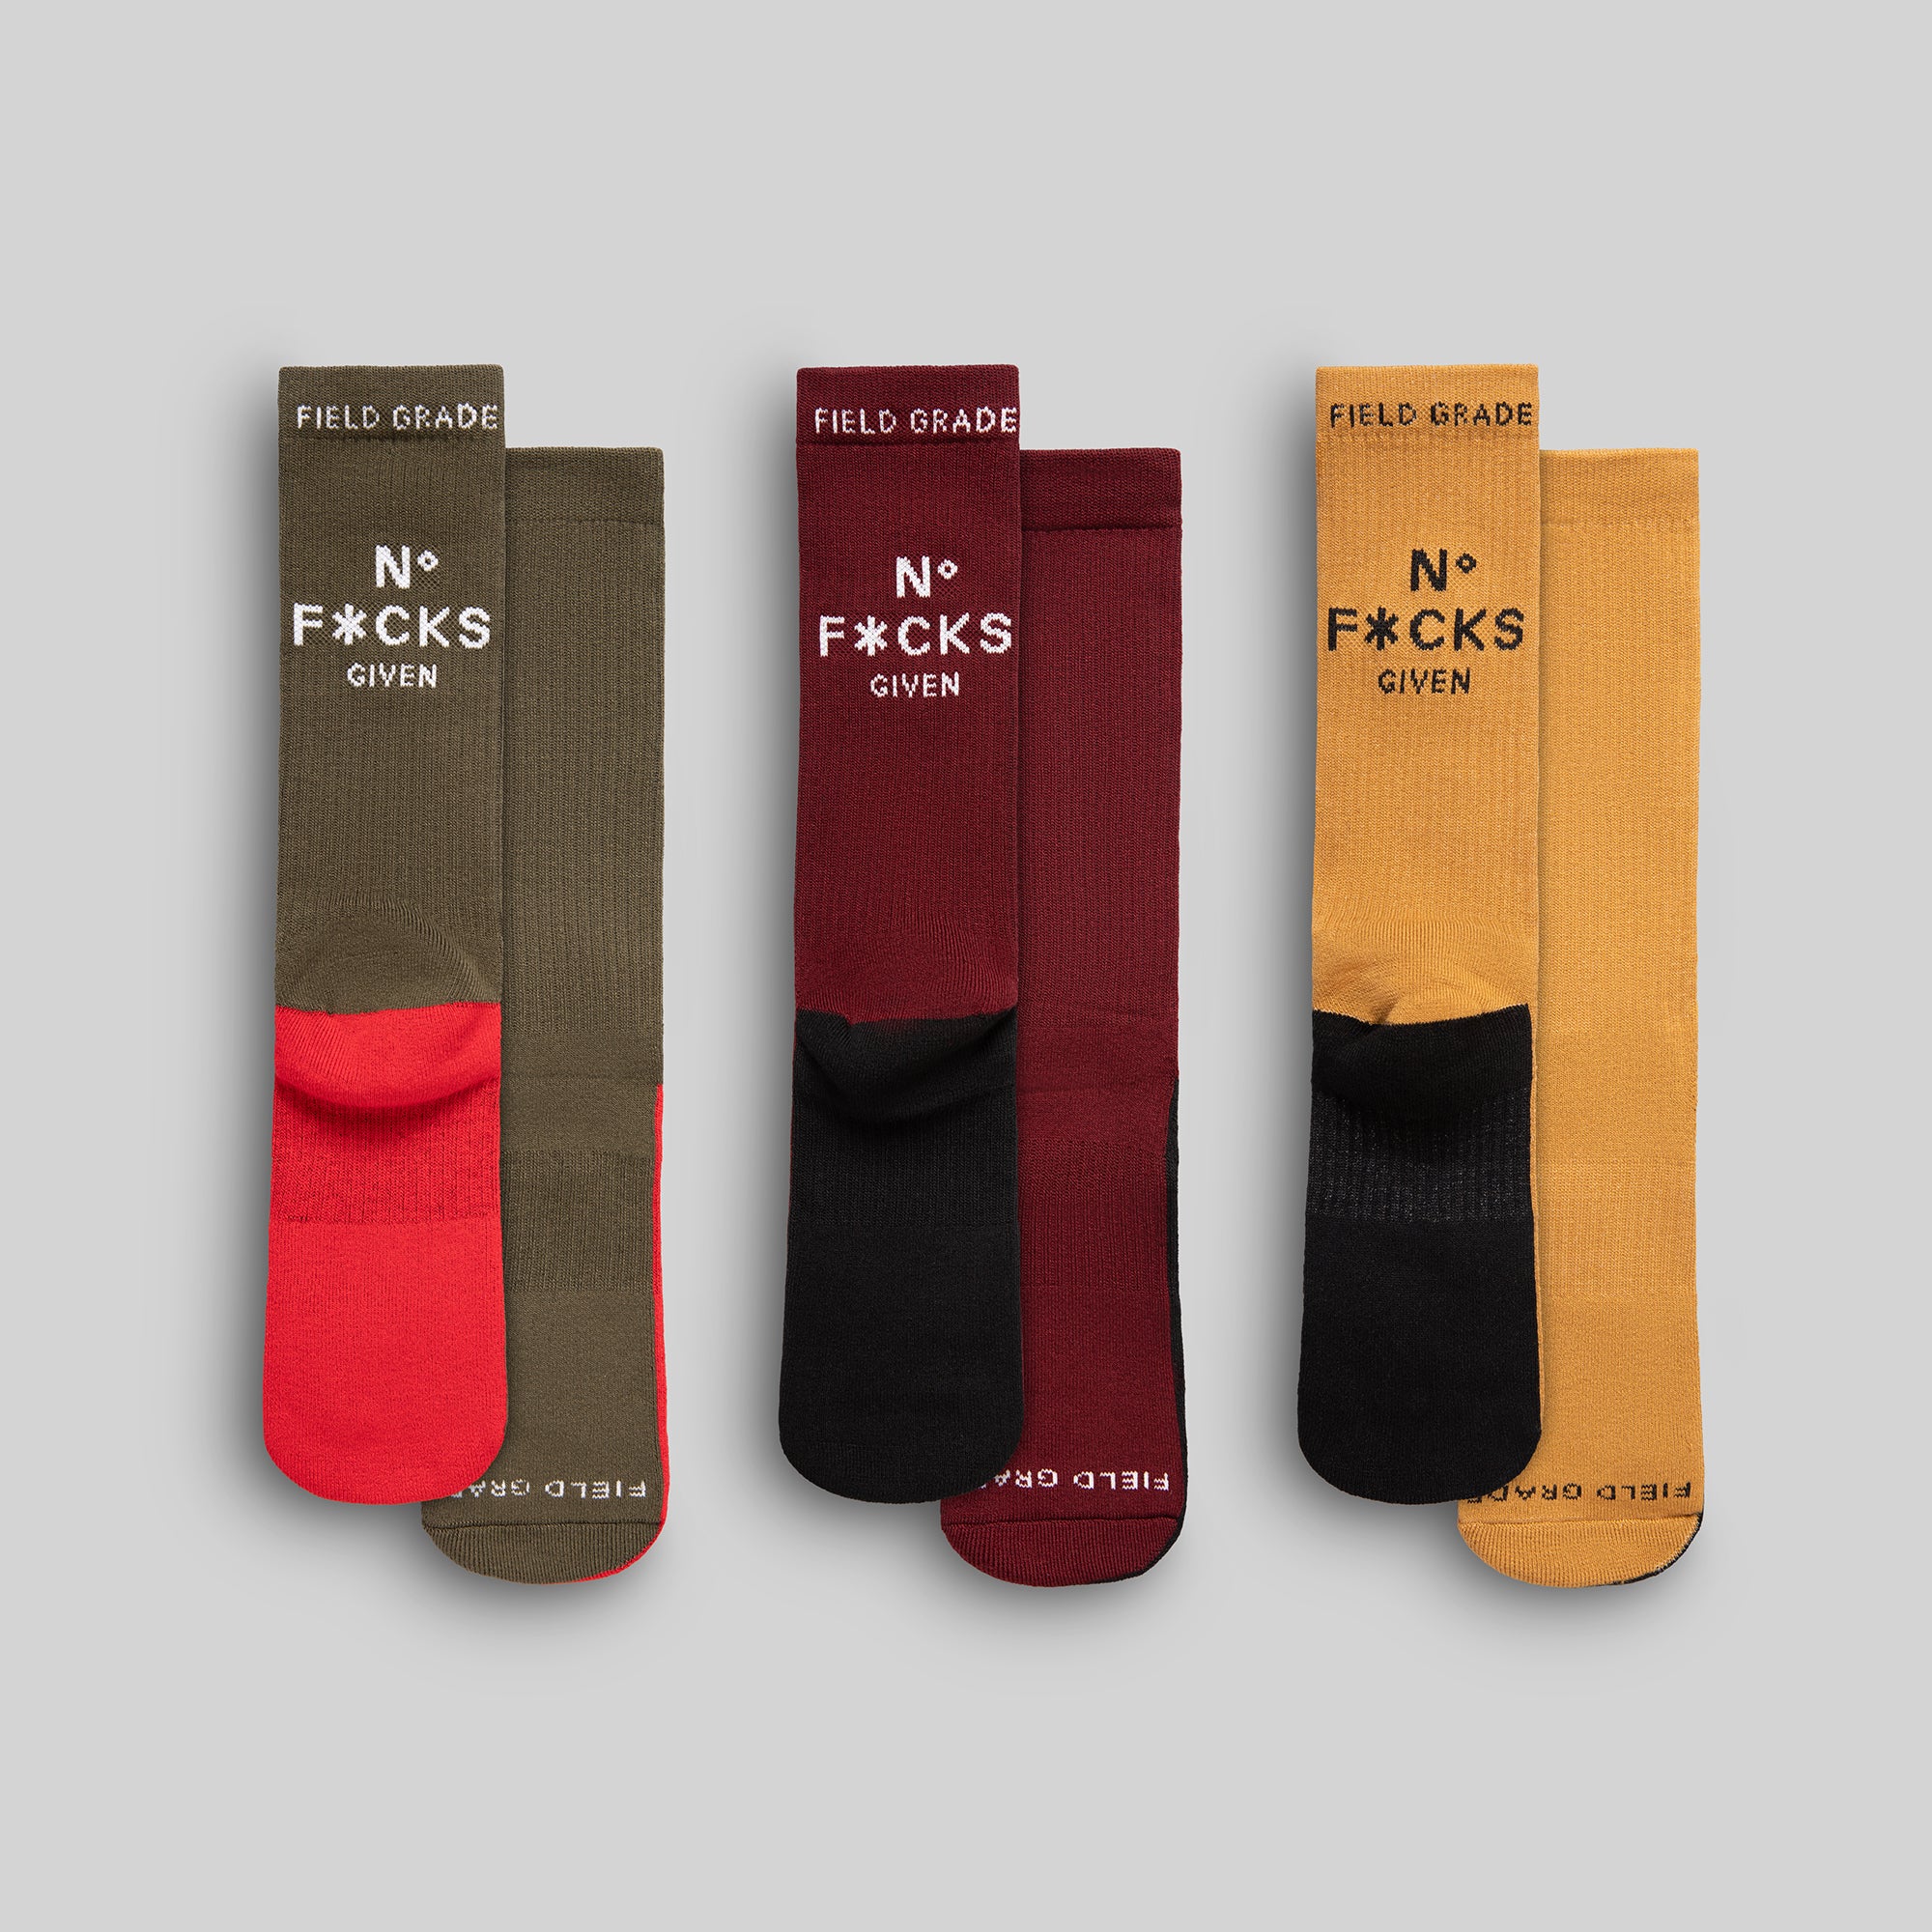 FIELD GRADE CUSHIONED CREW SOCKS - NO F*CKS GIVEN BORDEAUX/OLIVE/WHEAT PACK